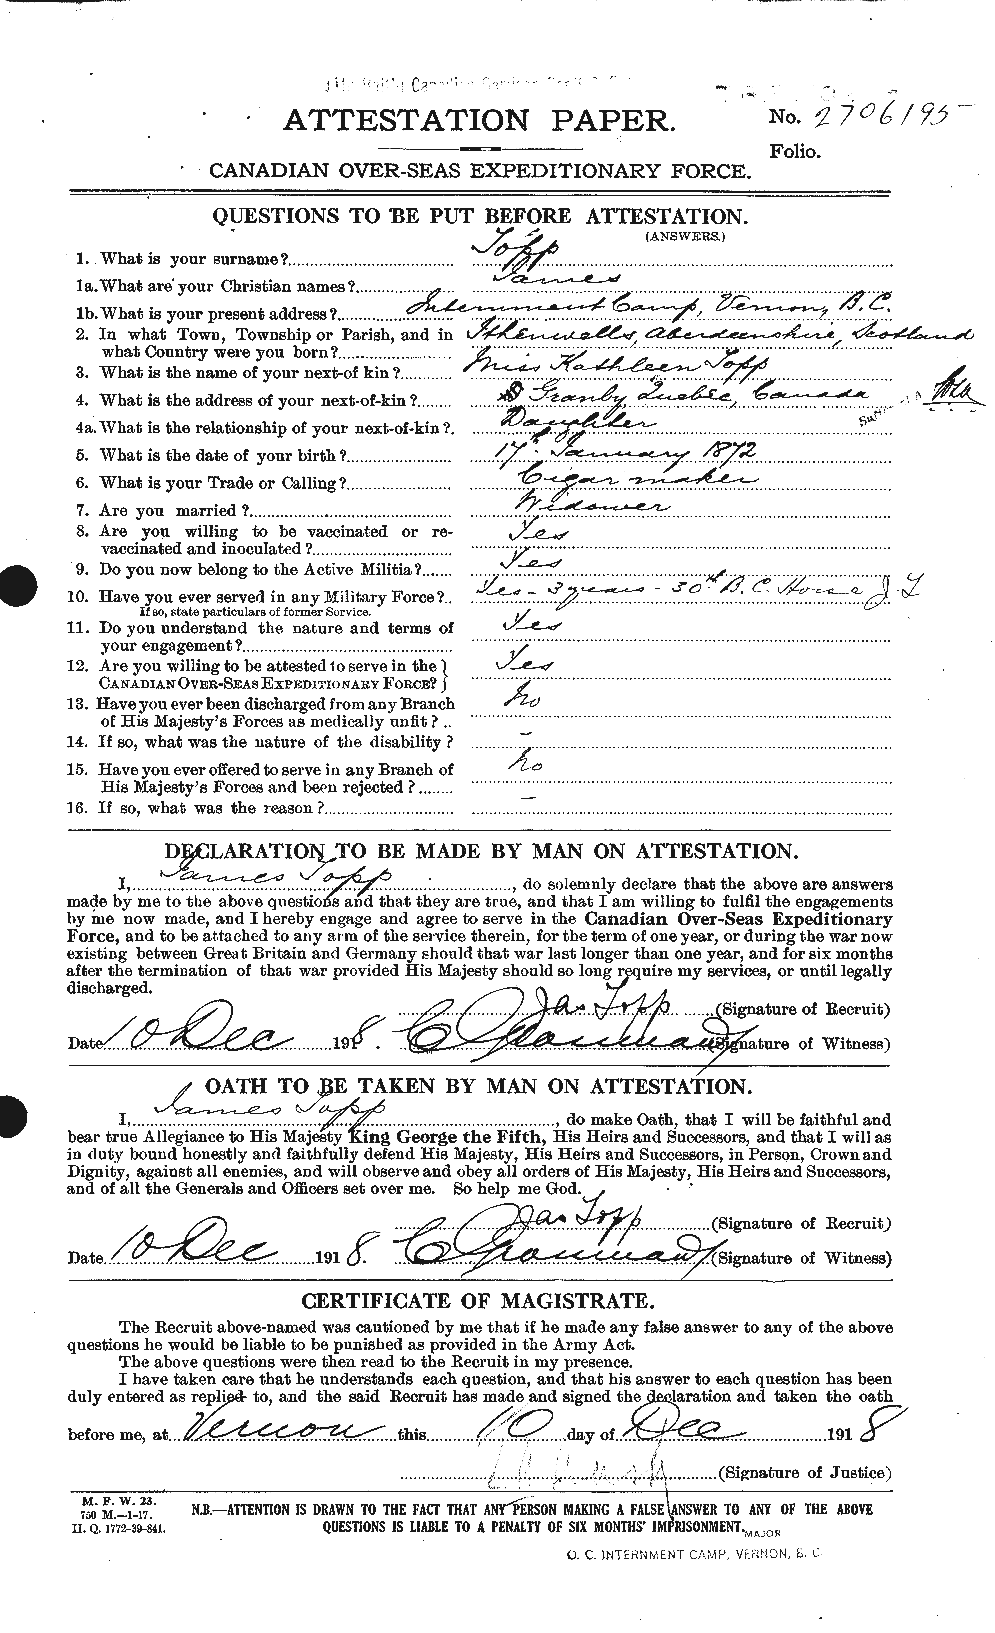 Personnel Records of the First World War - CEF 645799a